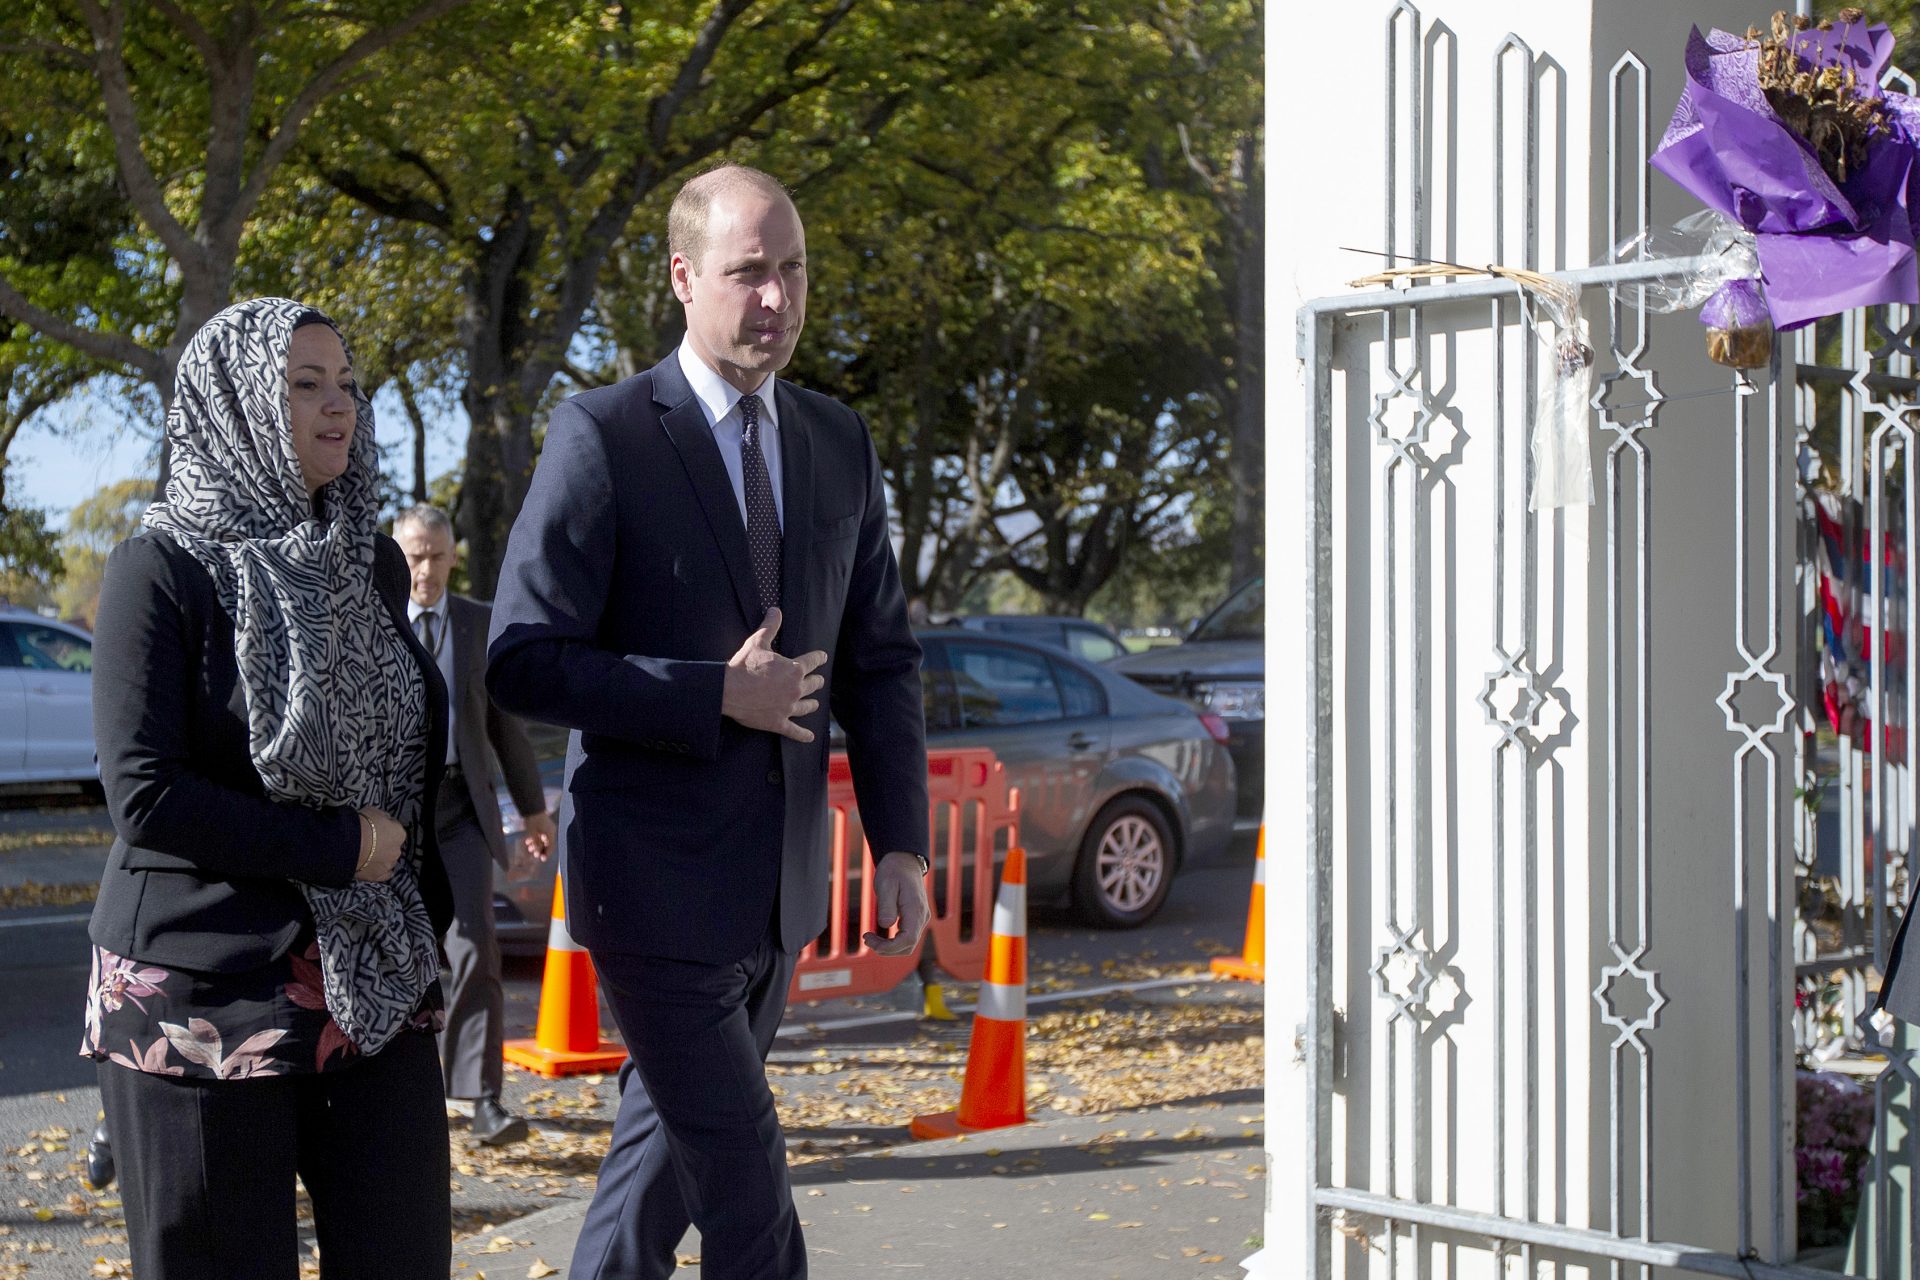 <p>It wasn't always festive, though. The terrorist attack in the Al Noor mosque in Christchurch, on March 15, 2019, prompted a visit by Prince William on behalf of the Queen. The royal family paid its respects to the community that had lost 51 members in the mosque and the Linwood Islamic Centre.</p>